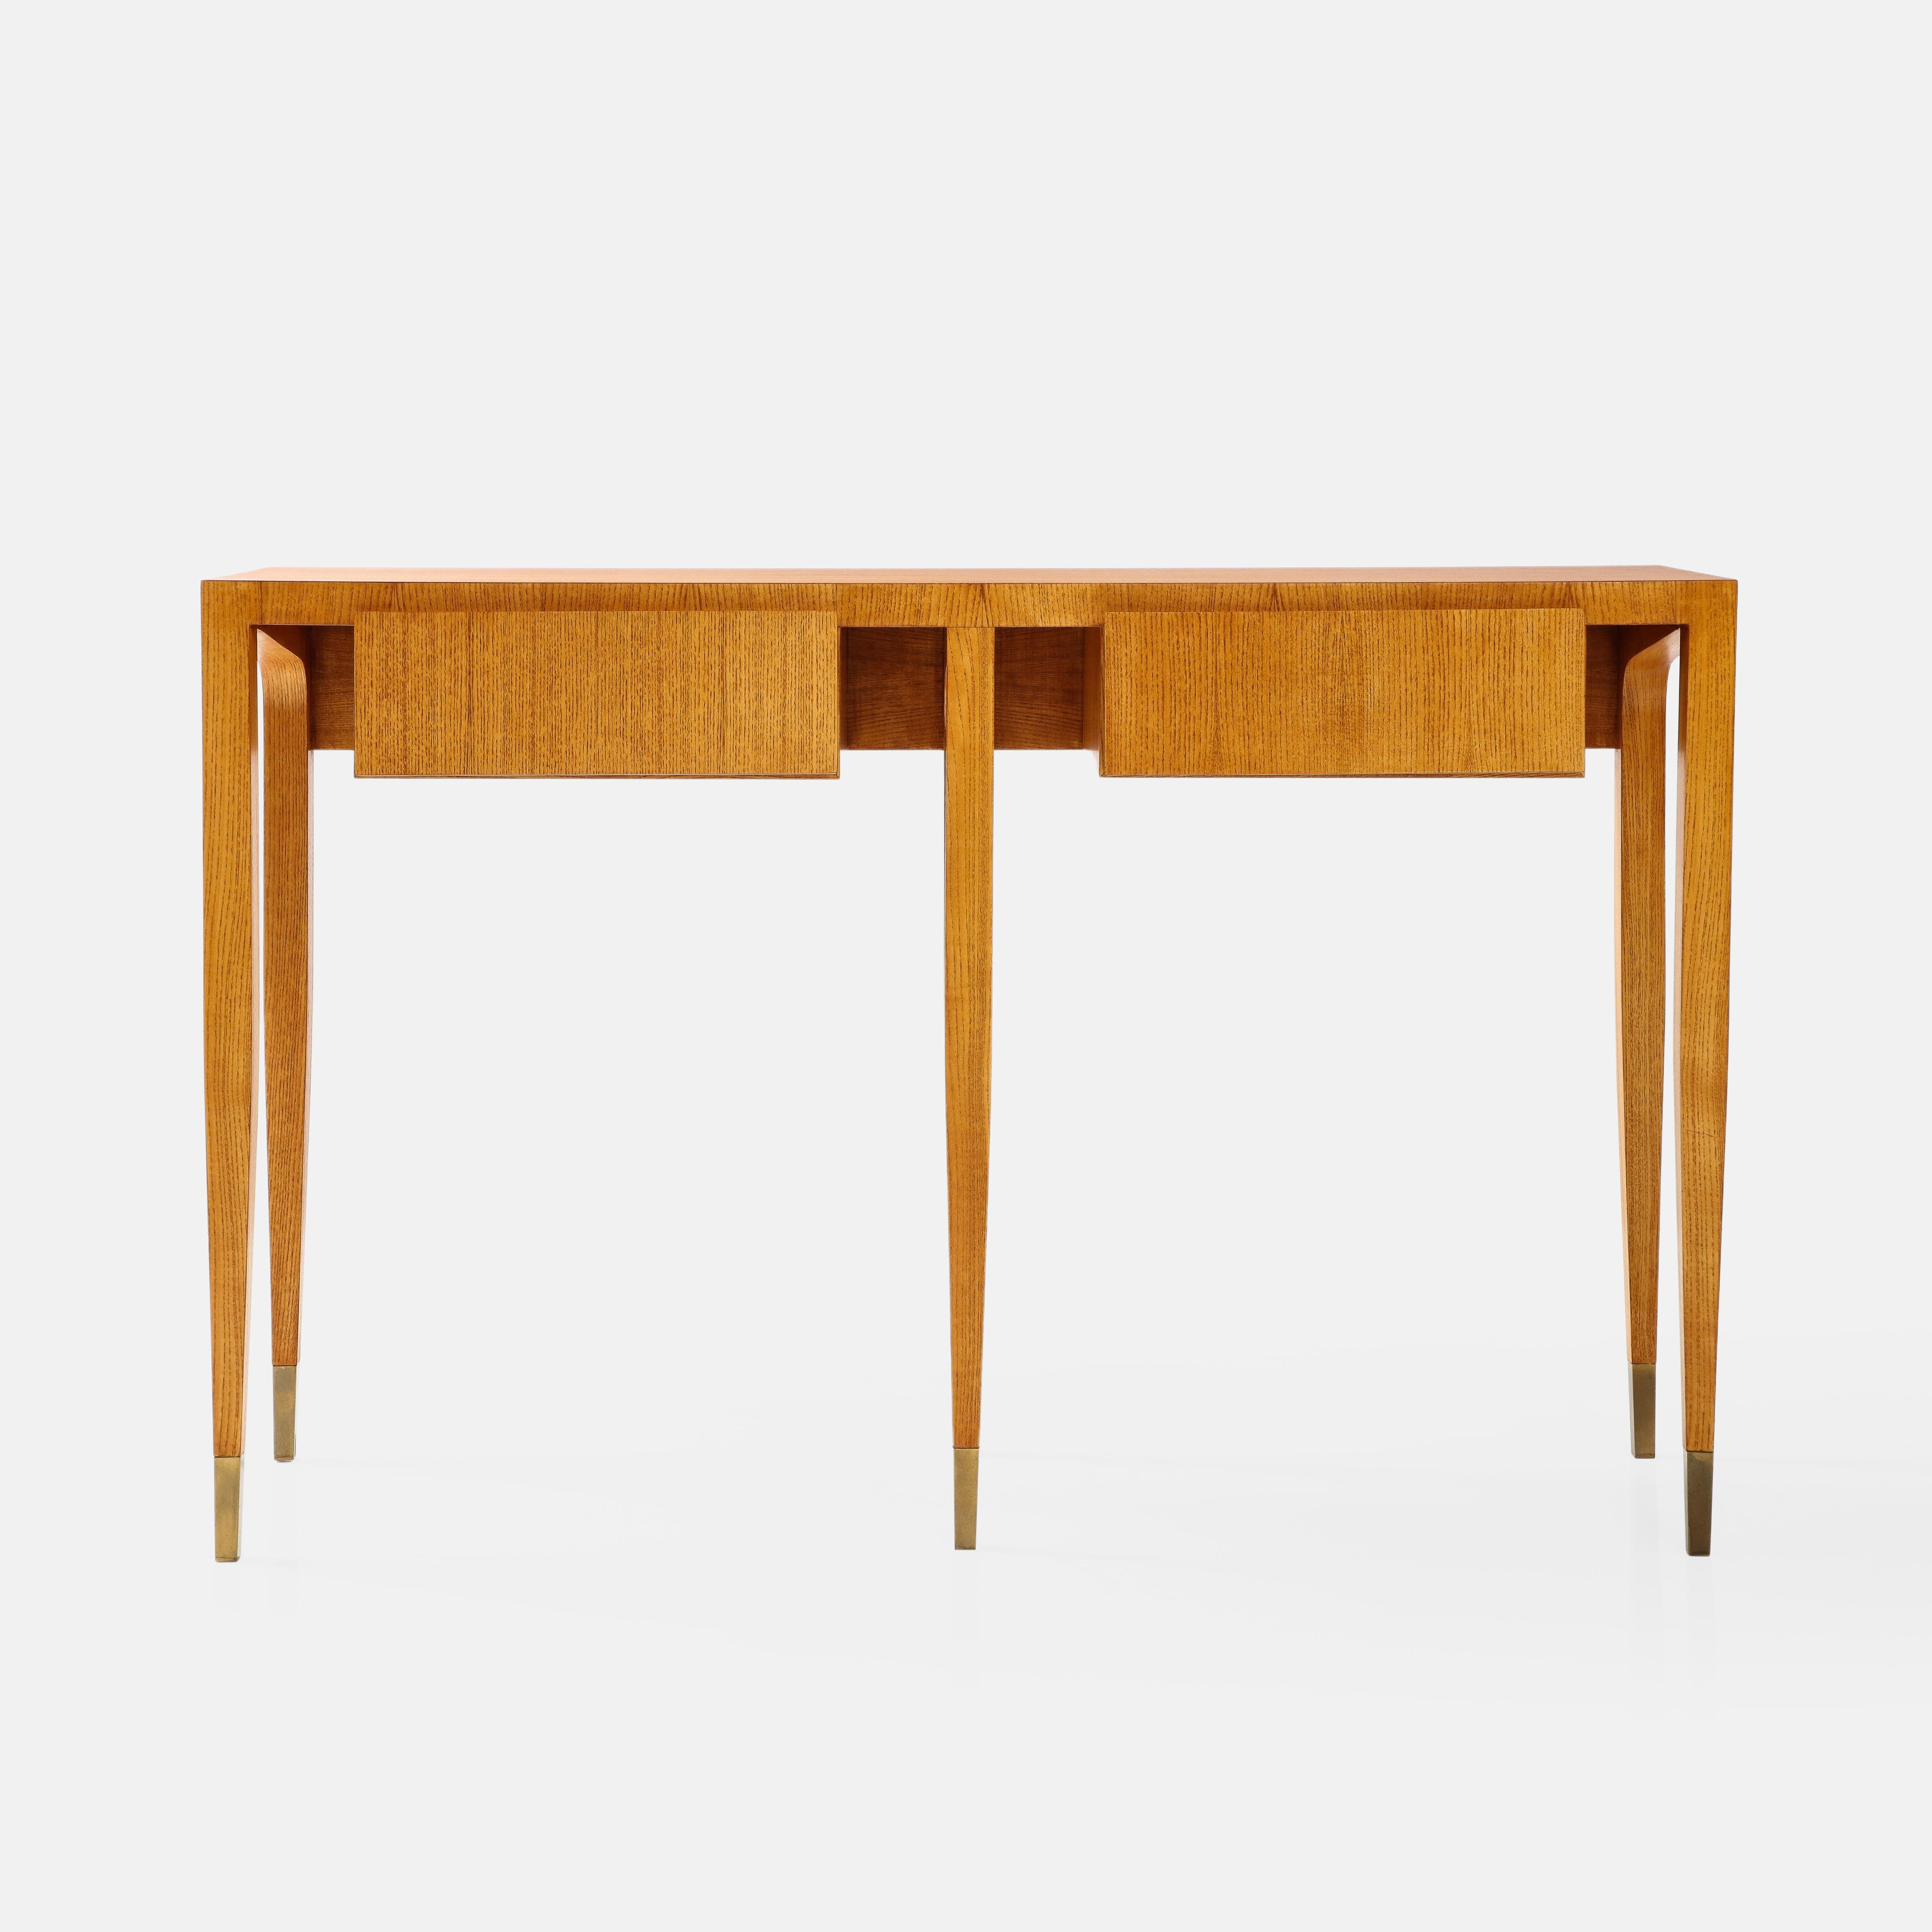 Gio Ponti for Giordano Chiesa Rare Pair of Ash Wood Consoles, Italy, 1950s For Sale 8